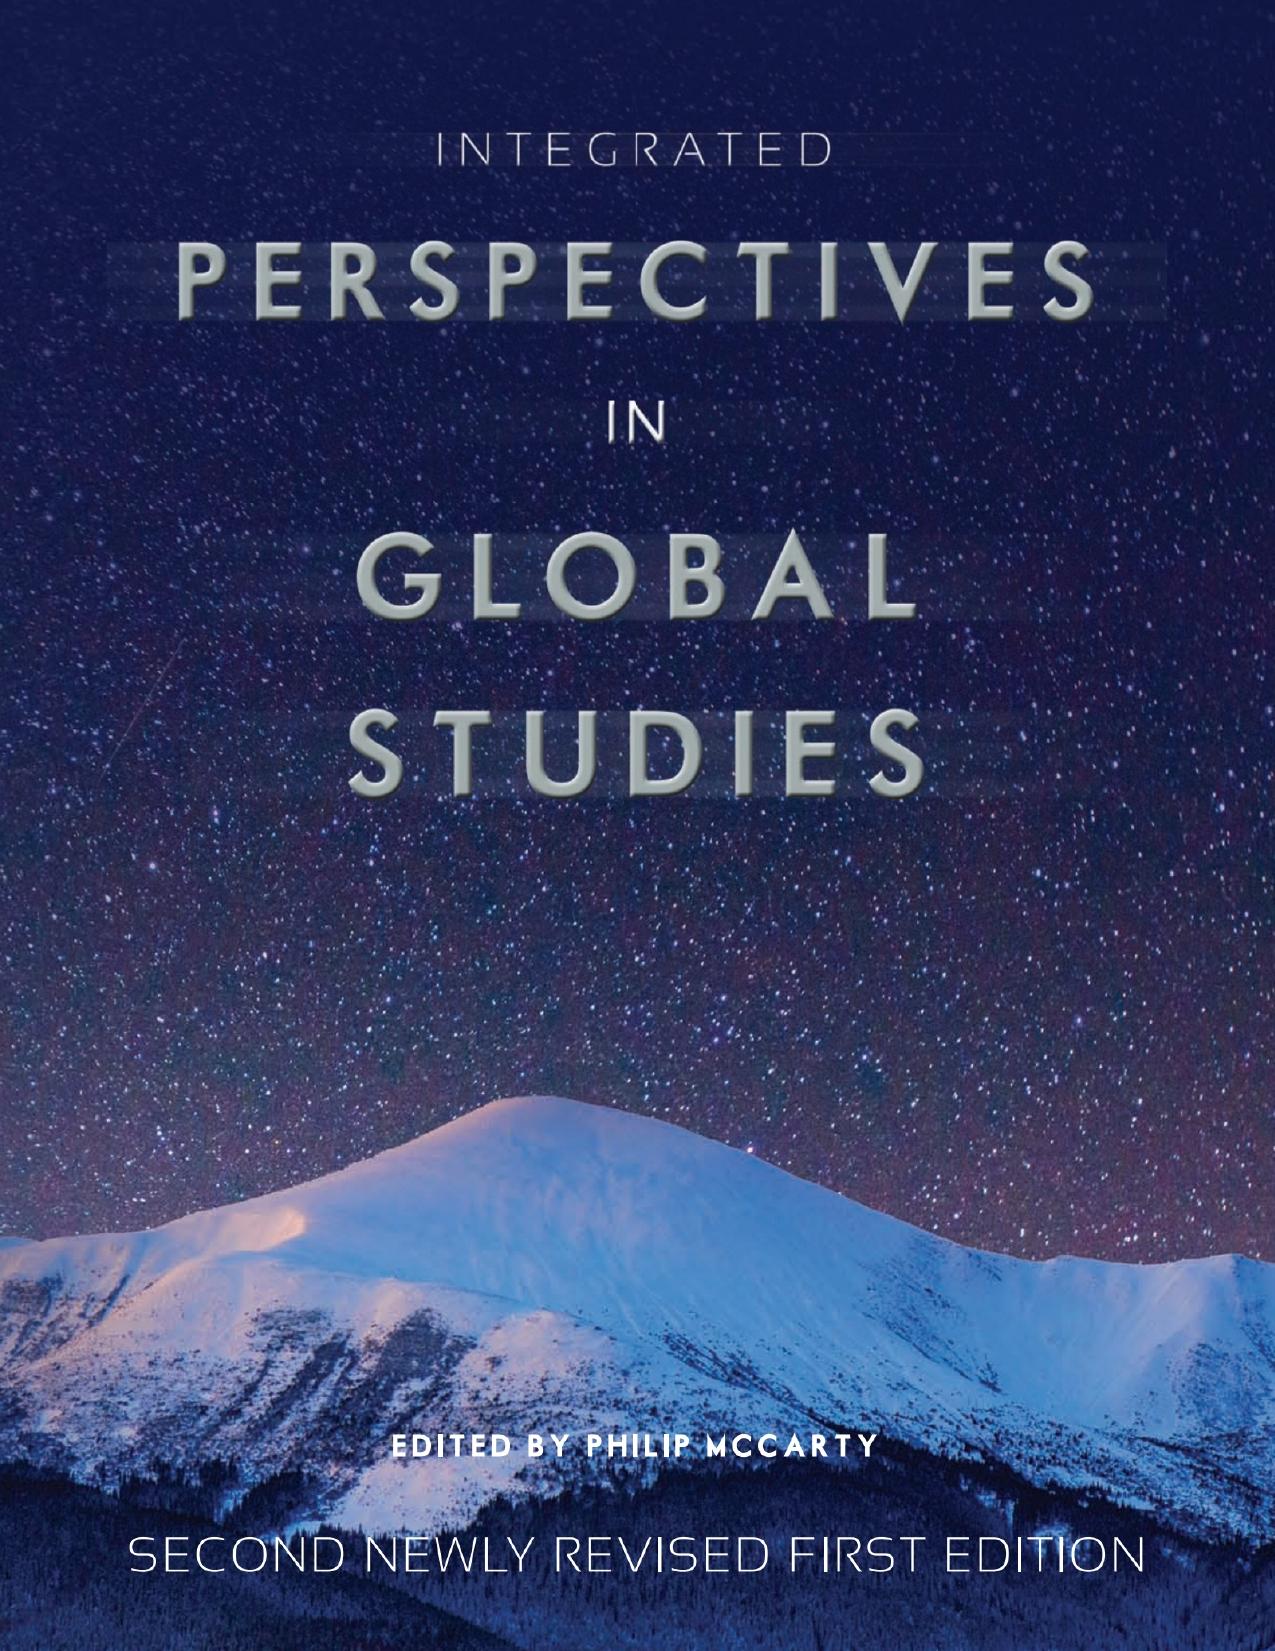 Integrated Perspectives in Global Studies  by Philip McCarty 